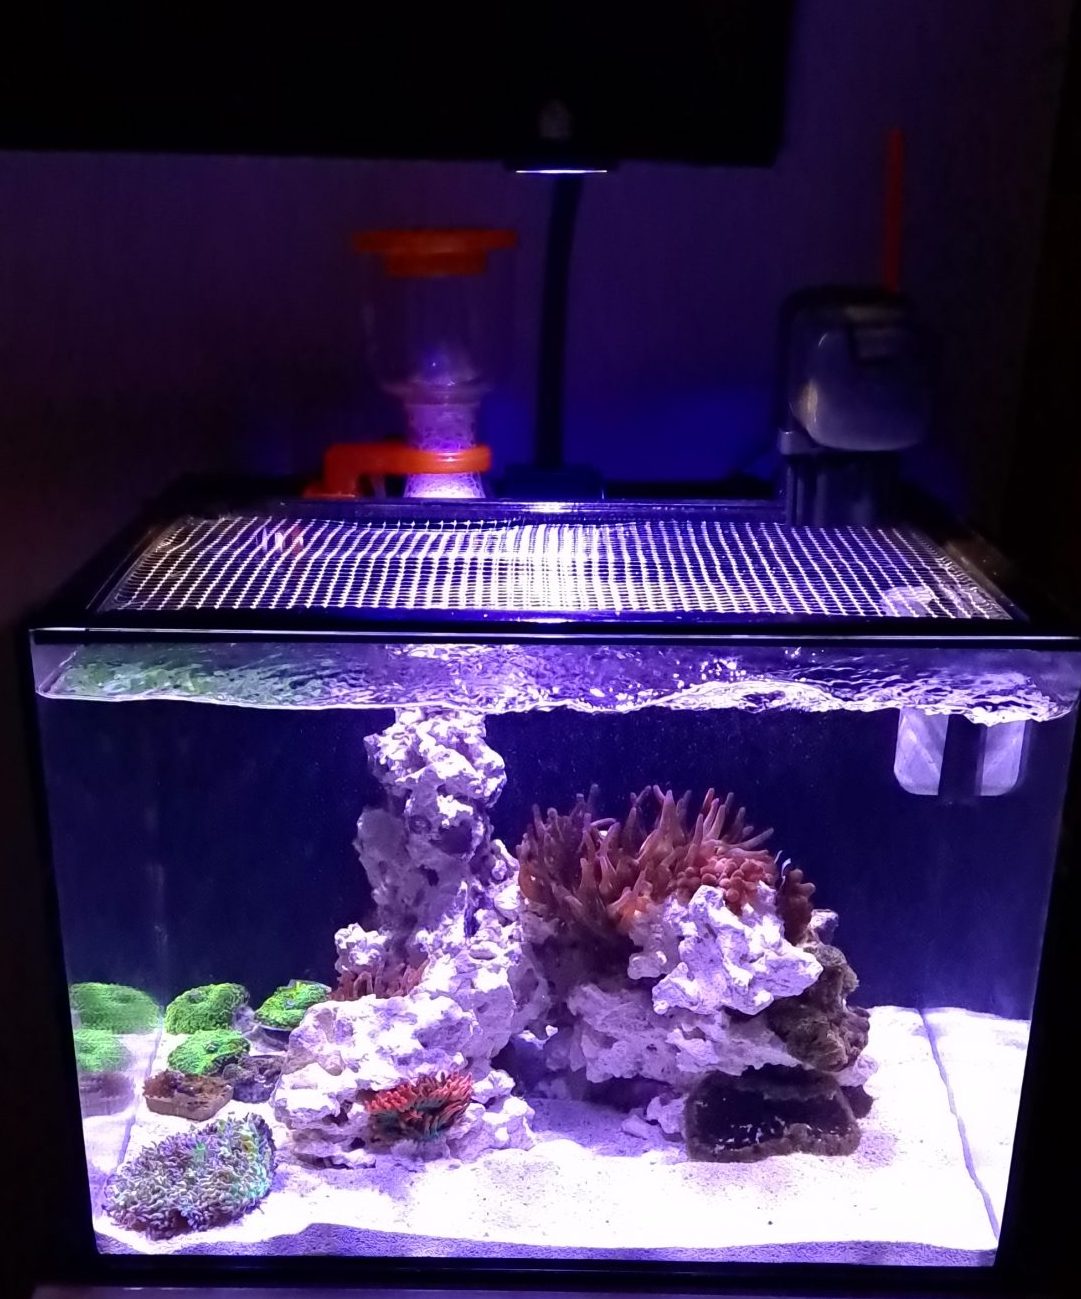 Product Update: Setting Up the Reef Casa Studio 12 Saltwater